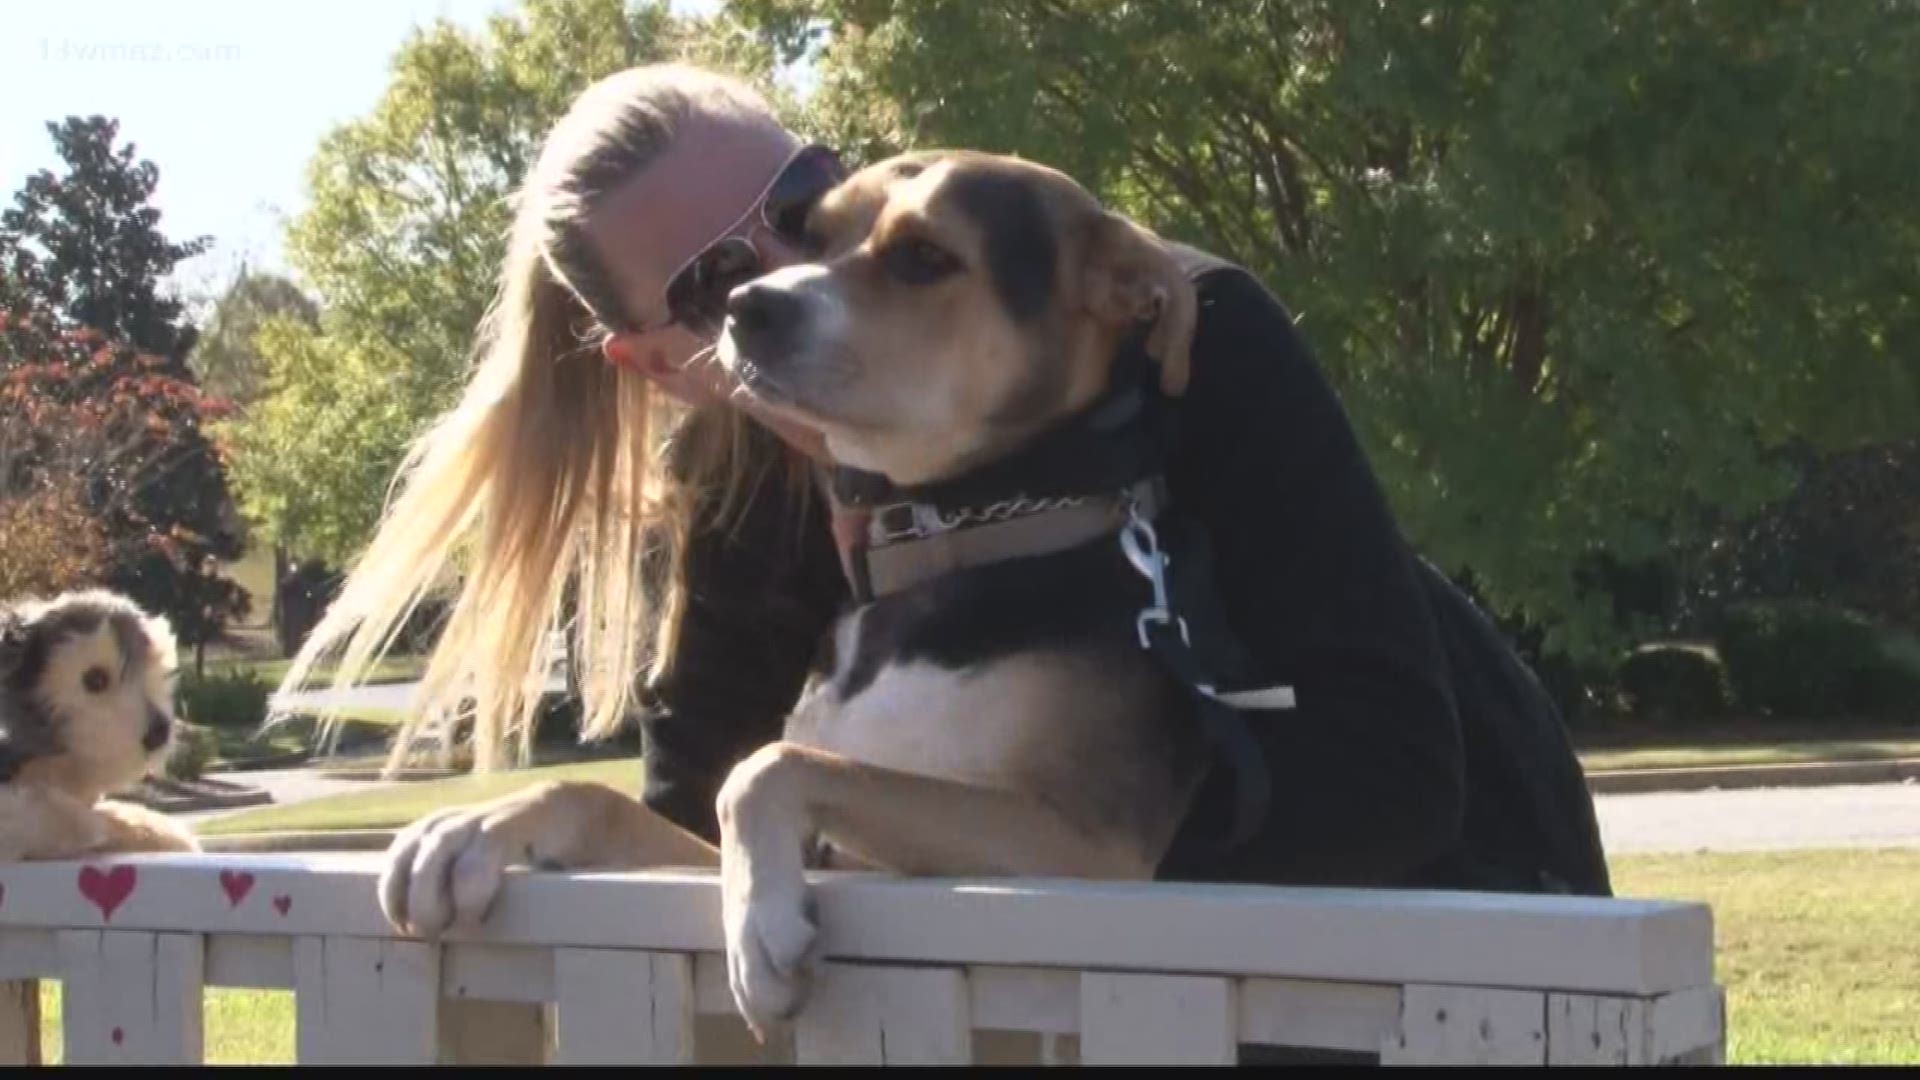 Coldwell Bank in Macon held their first 'Homes for Dogs' adoption event Saturday morning. It helped the community get to know local foster organizations.